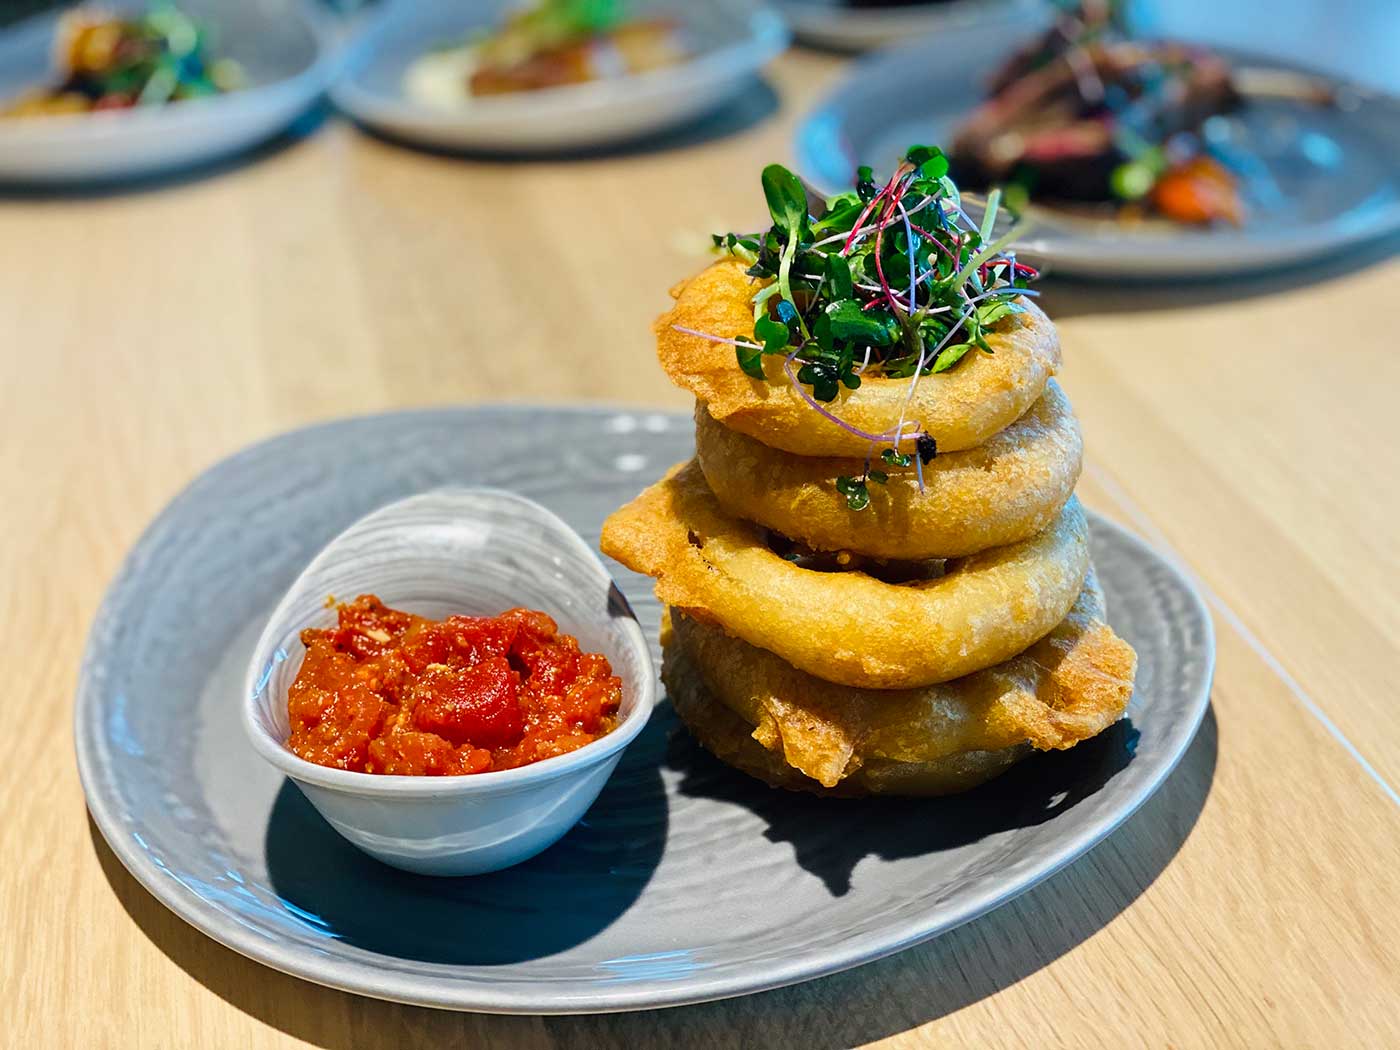 Vidalia onion rings in a stack with side of tomato sauce on a gray plate